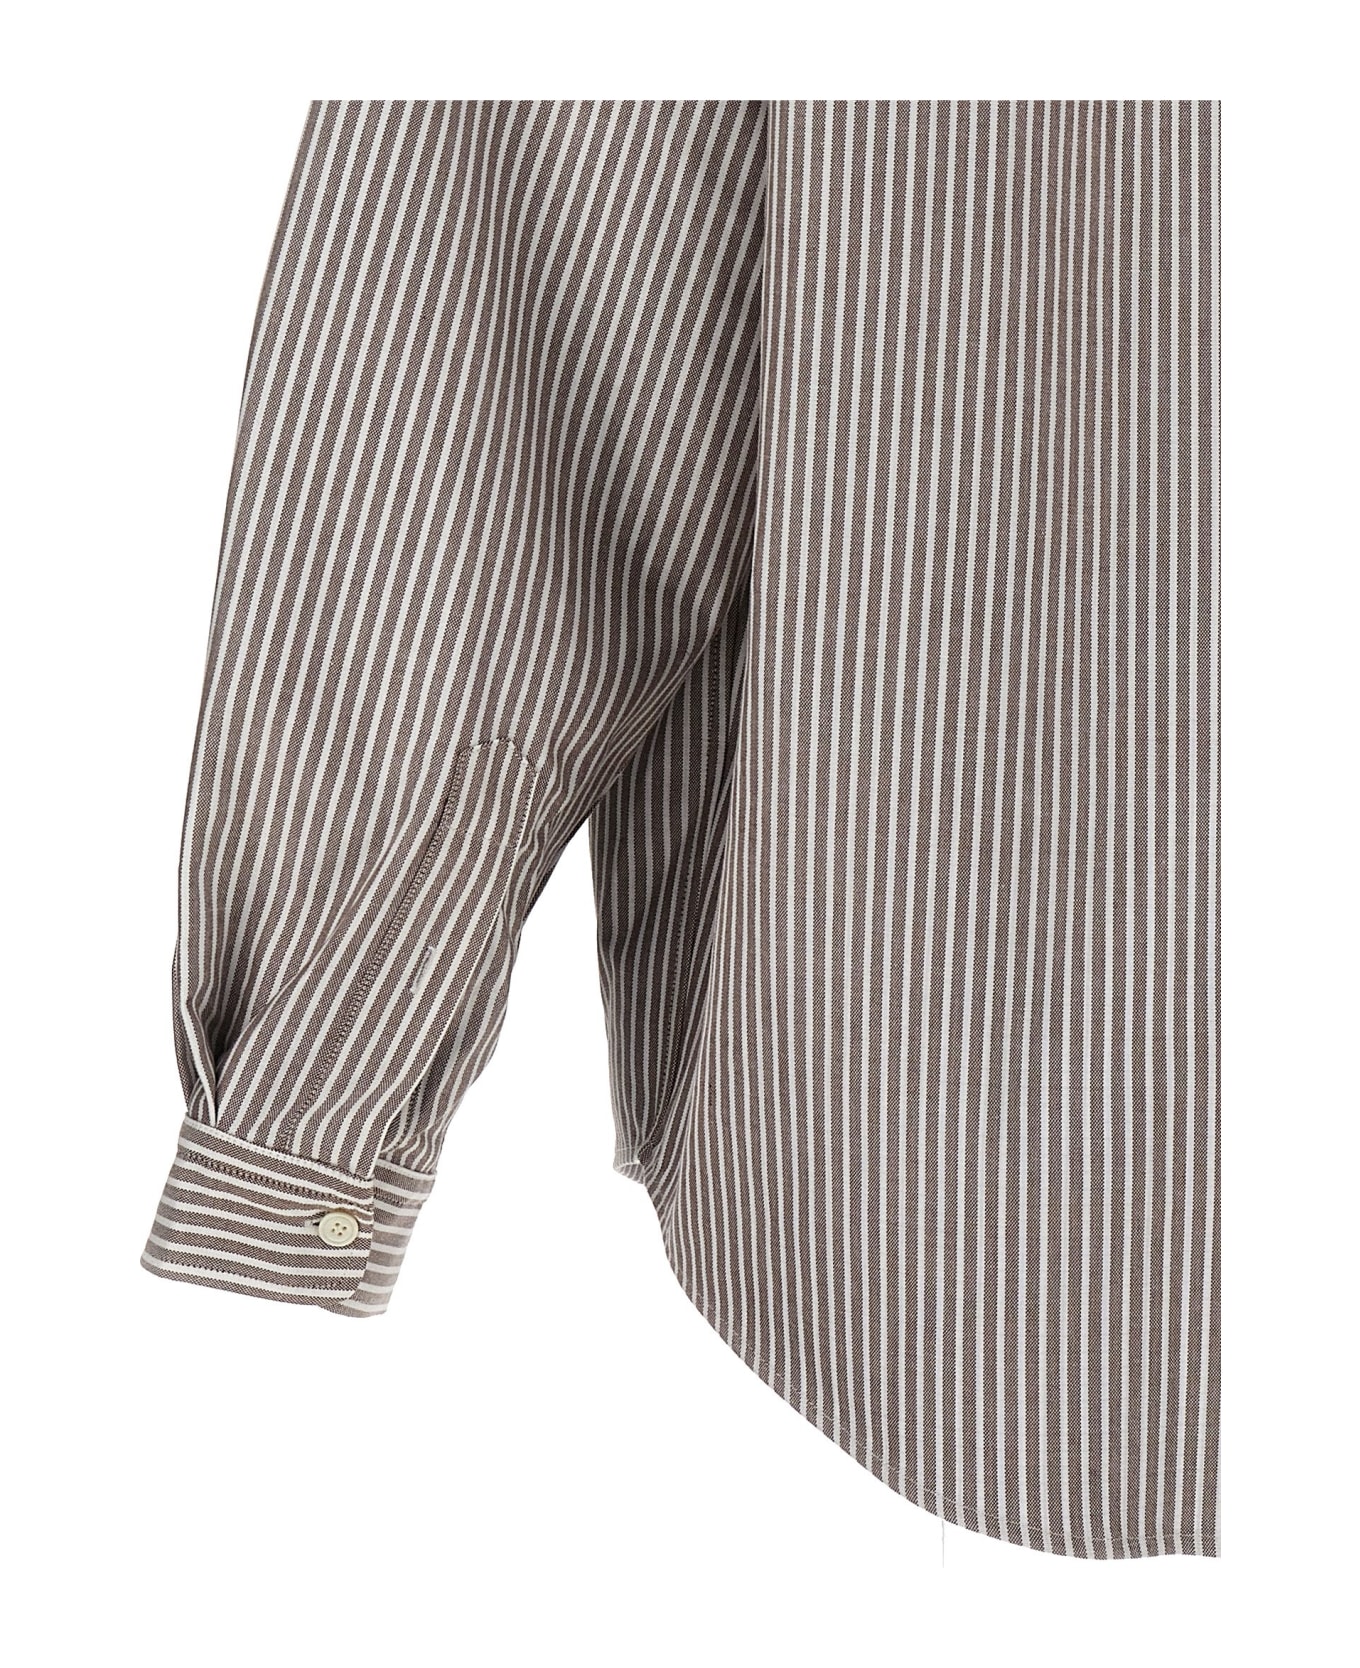 Hed Mayner 'pinstripe Oxford' Overshirt - Multicolor